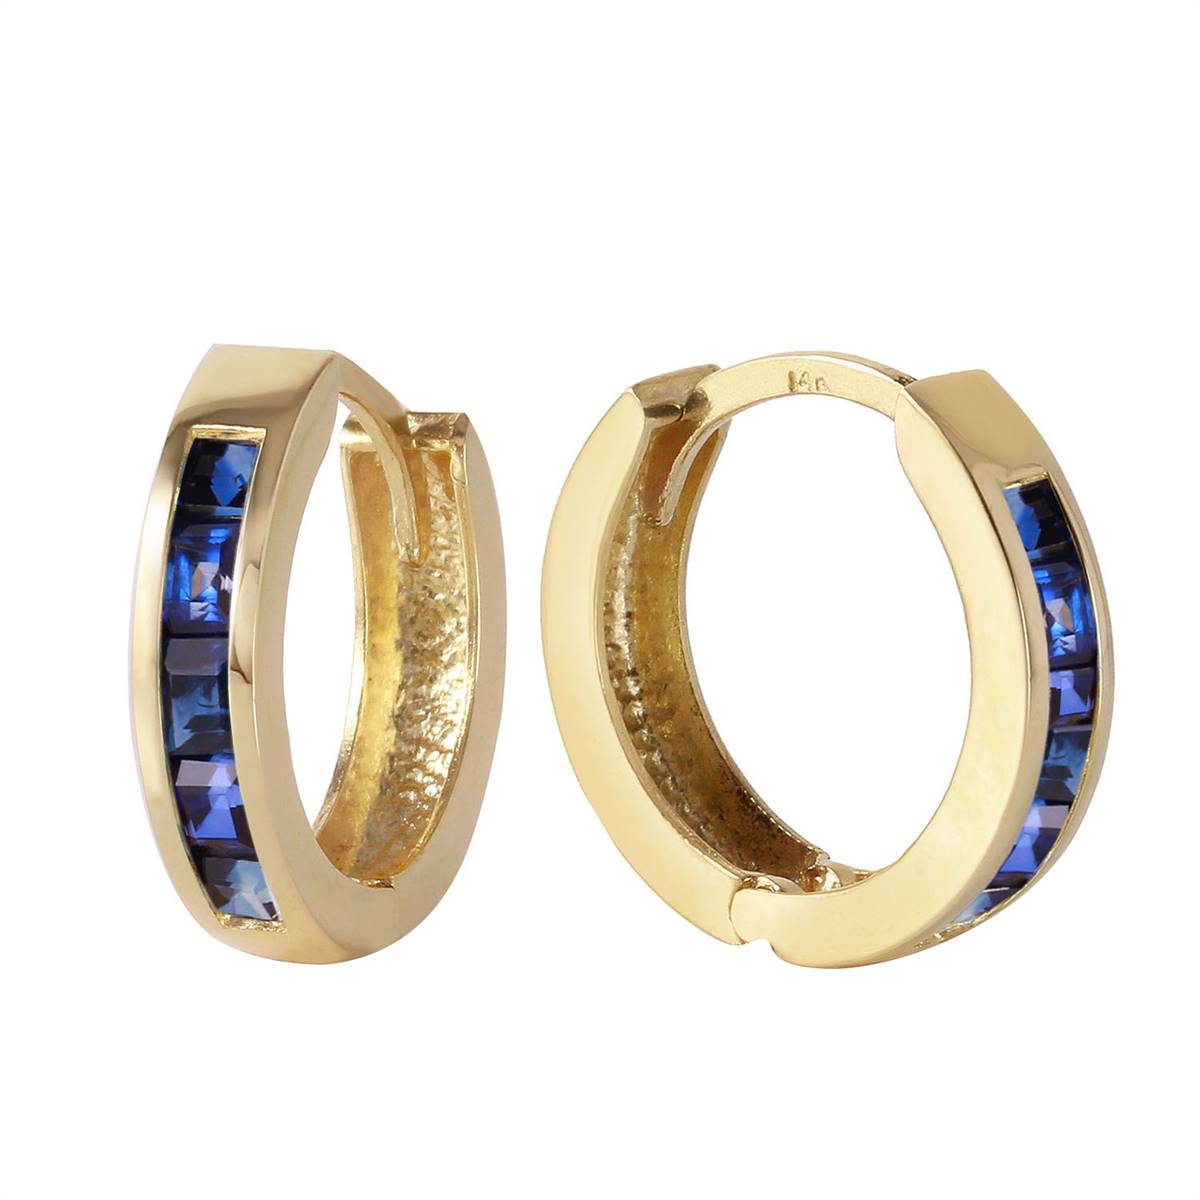 1.3 Carat 14K Solid Yellow Gold Hoop Earrings Natural Sapphire